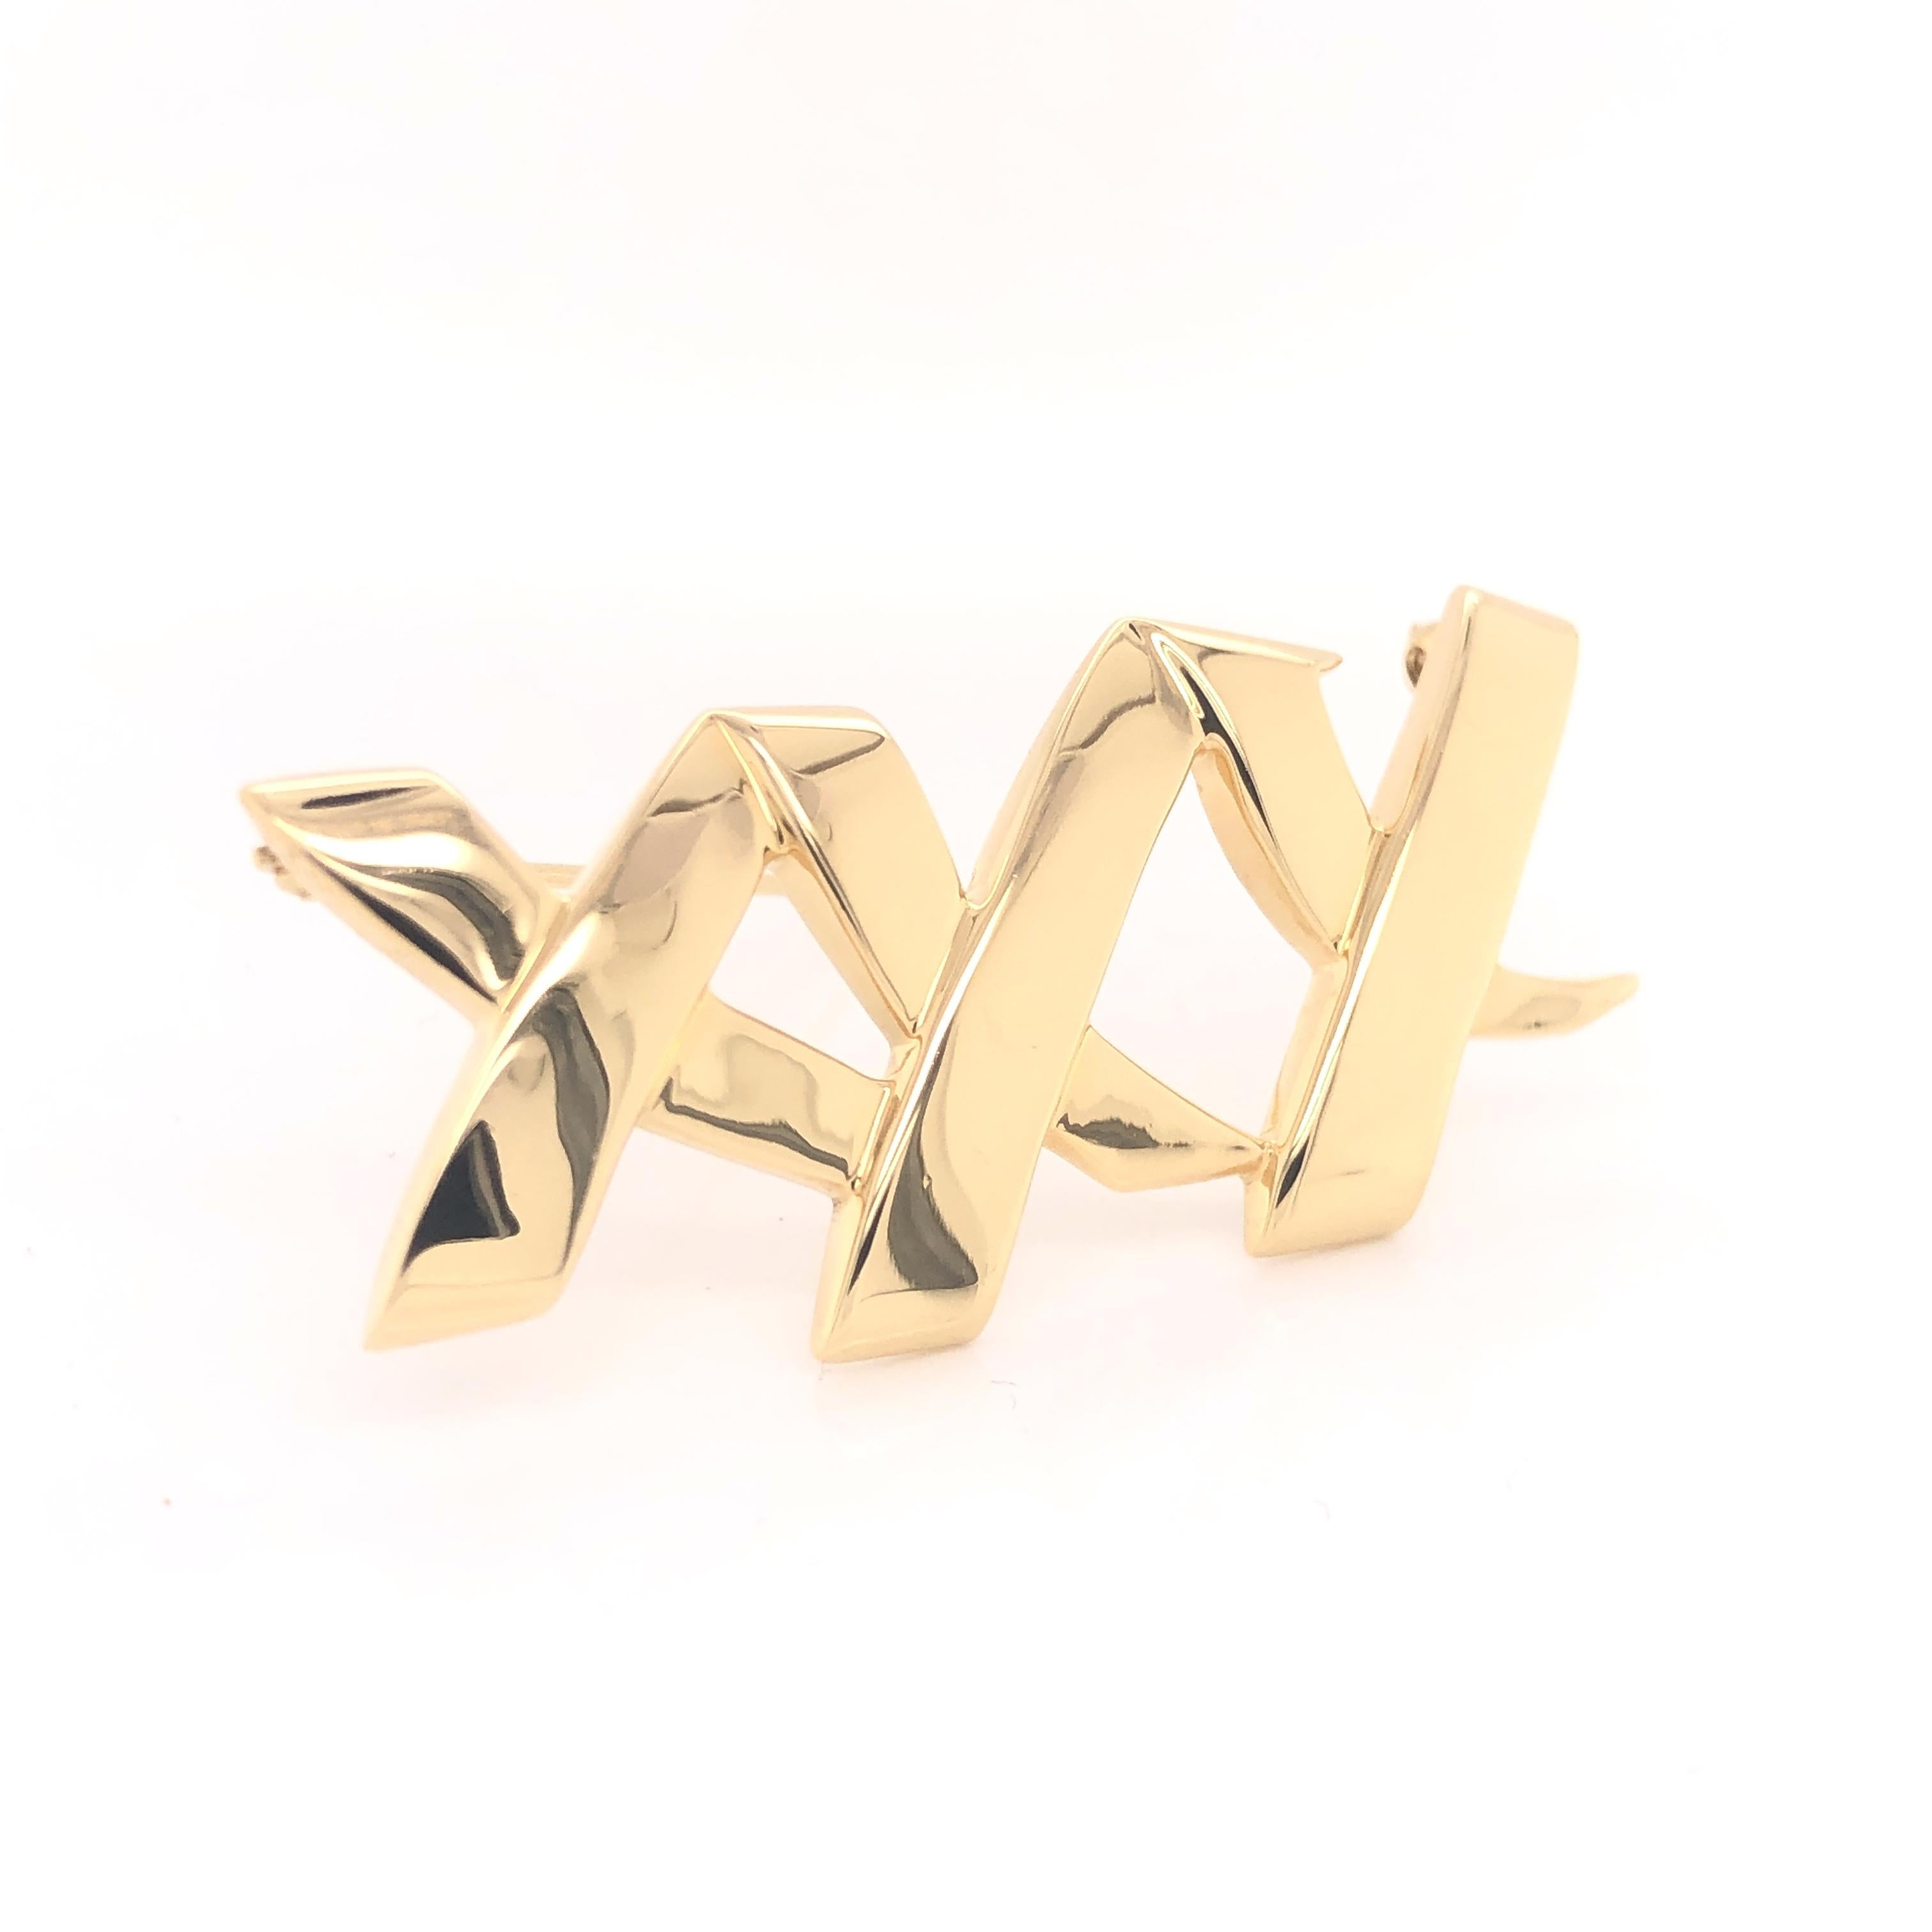 Retired Tiffany & Co Paloma Picasso Collection three X brooch. The brooch is approximately 1.75